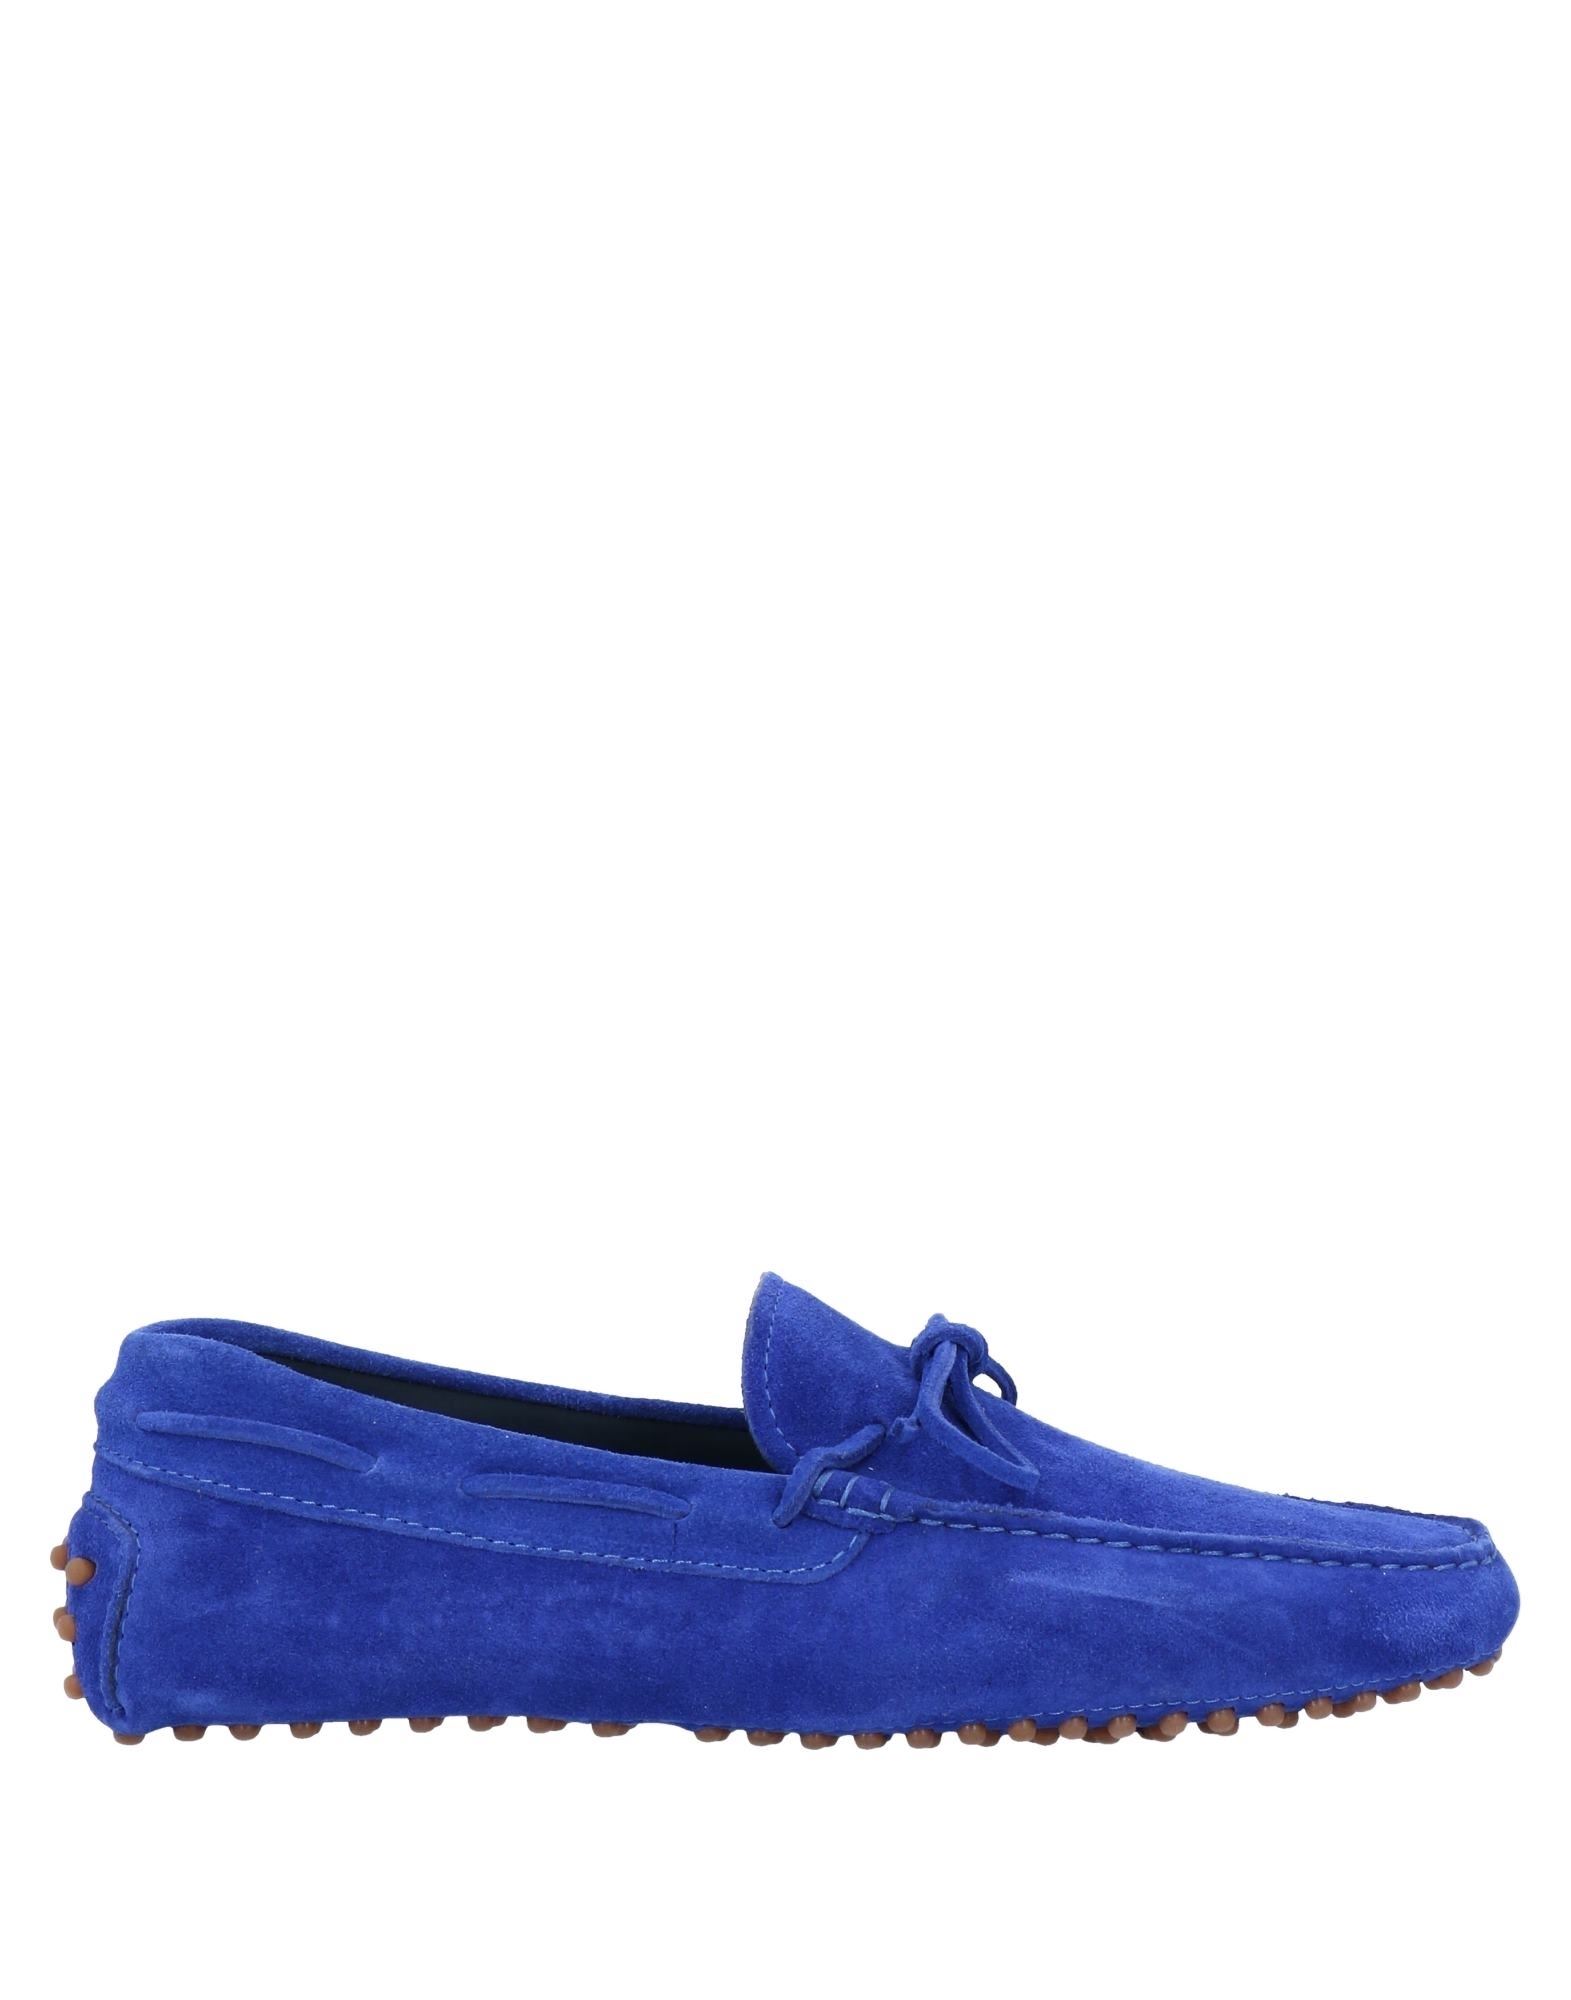 Alexander Trend Loafers In Bright Blue